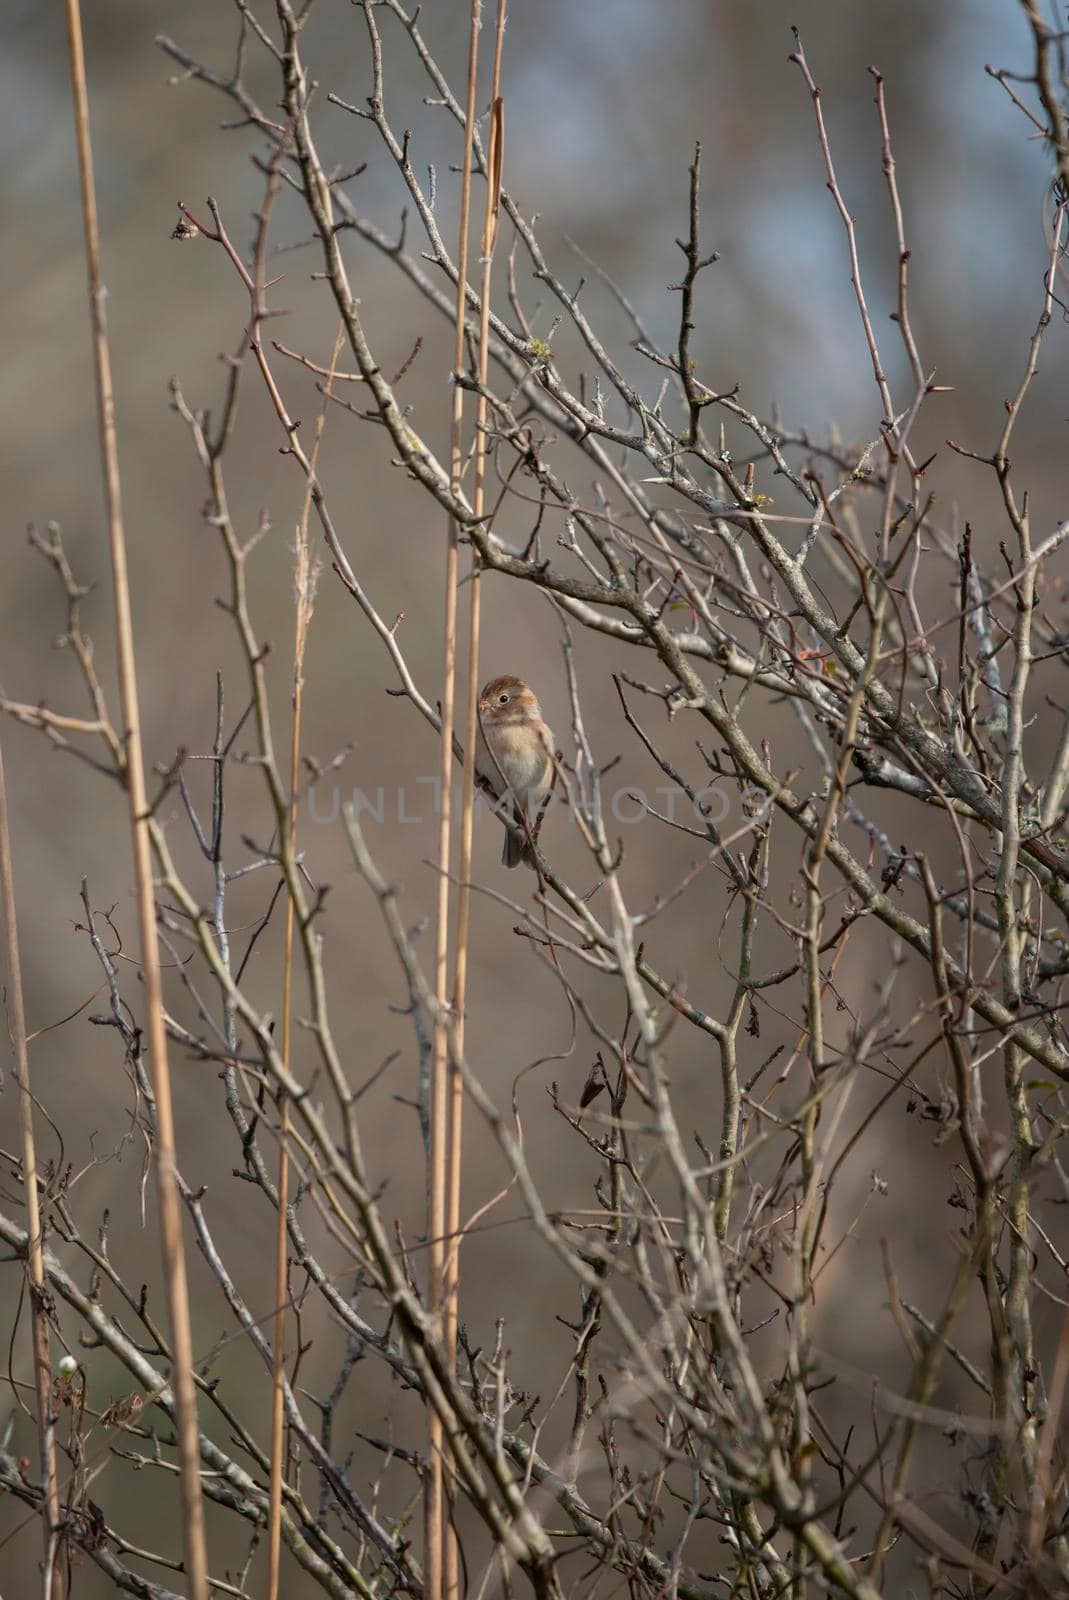 Field sparrow (Spizella pusilla) snacking while perched on a thin reed in a field